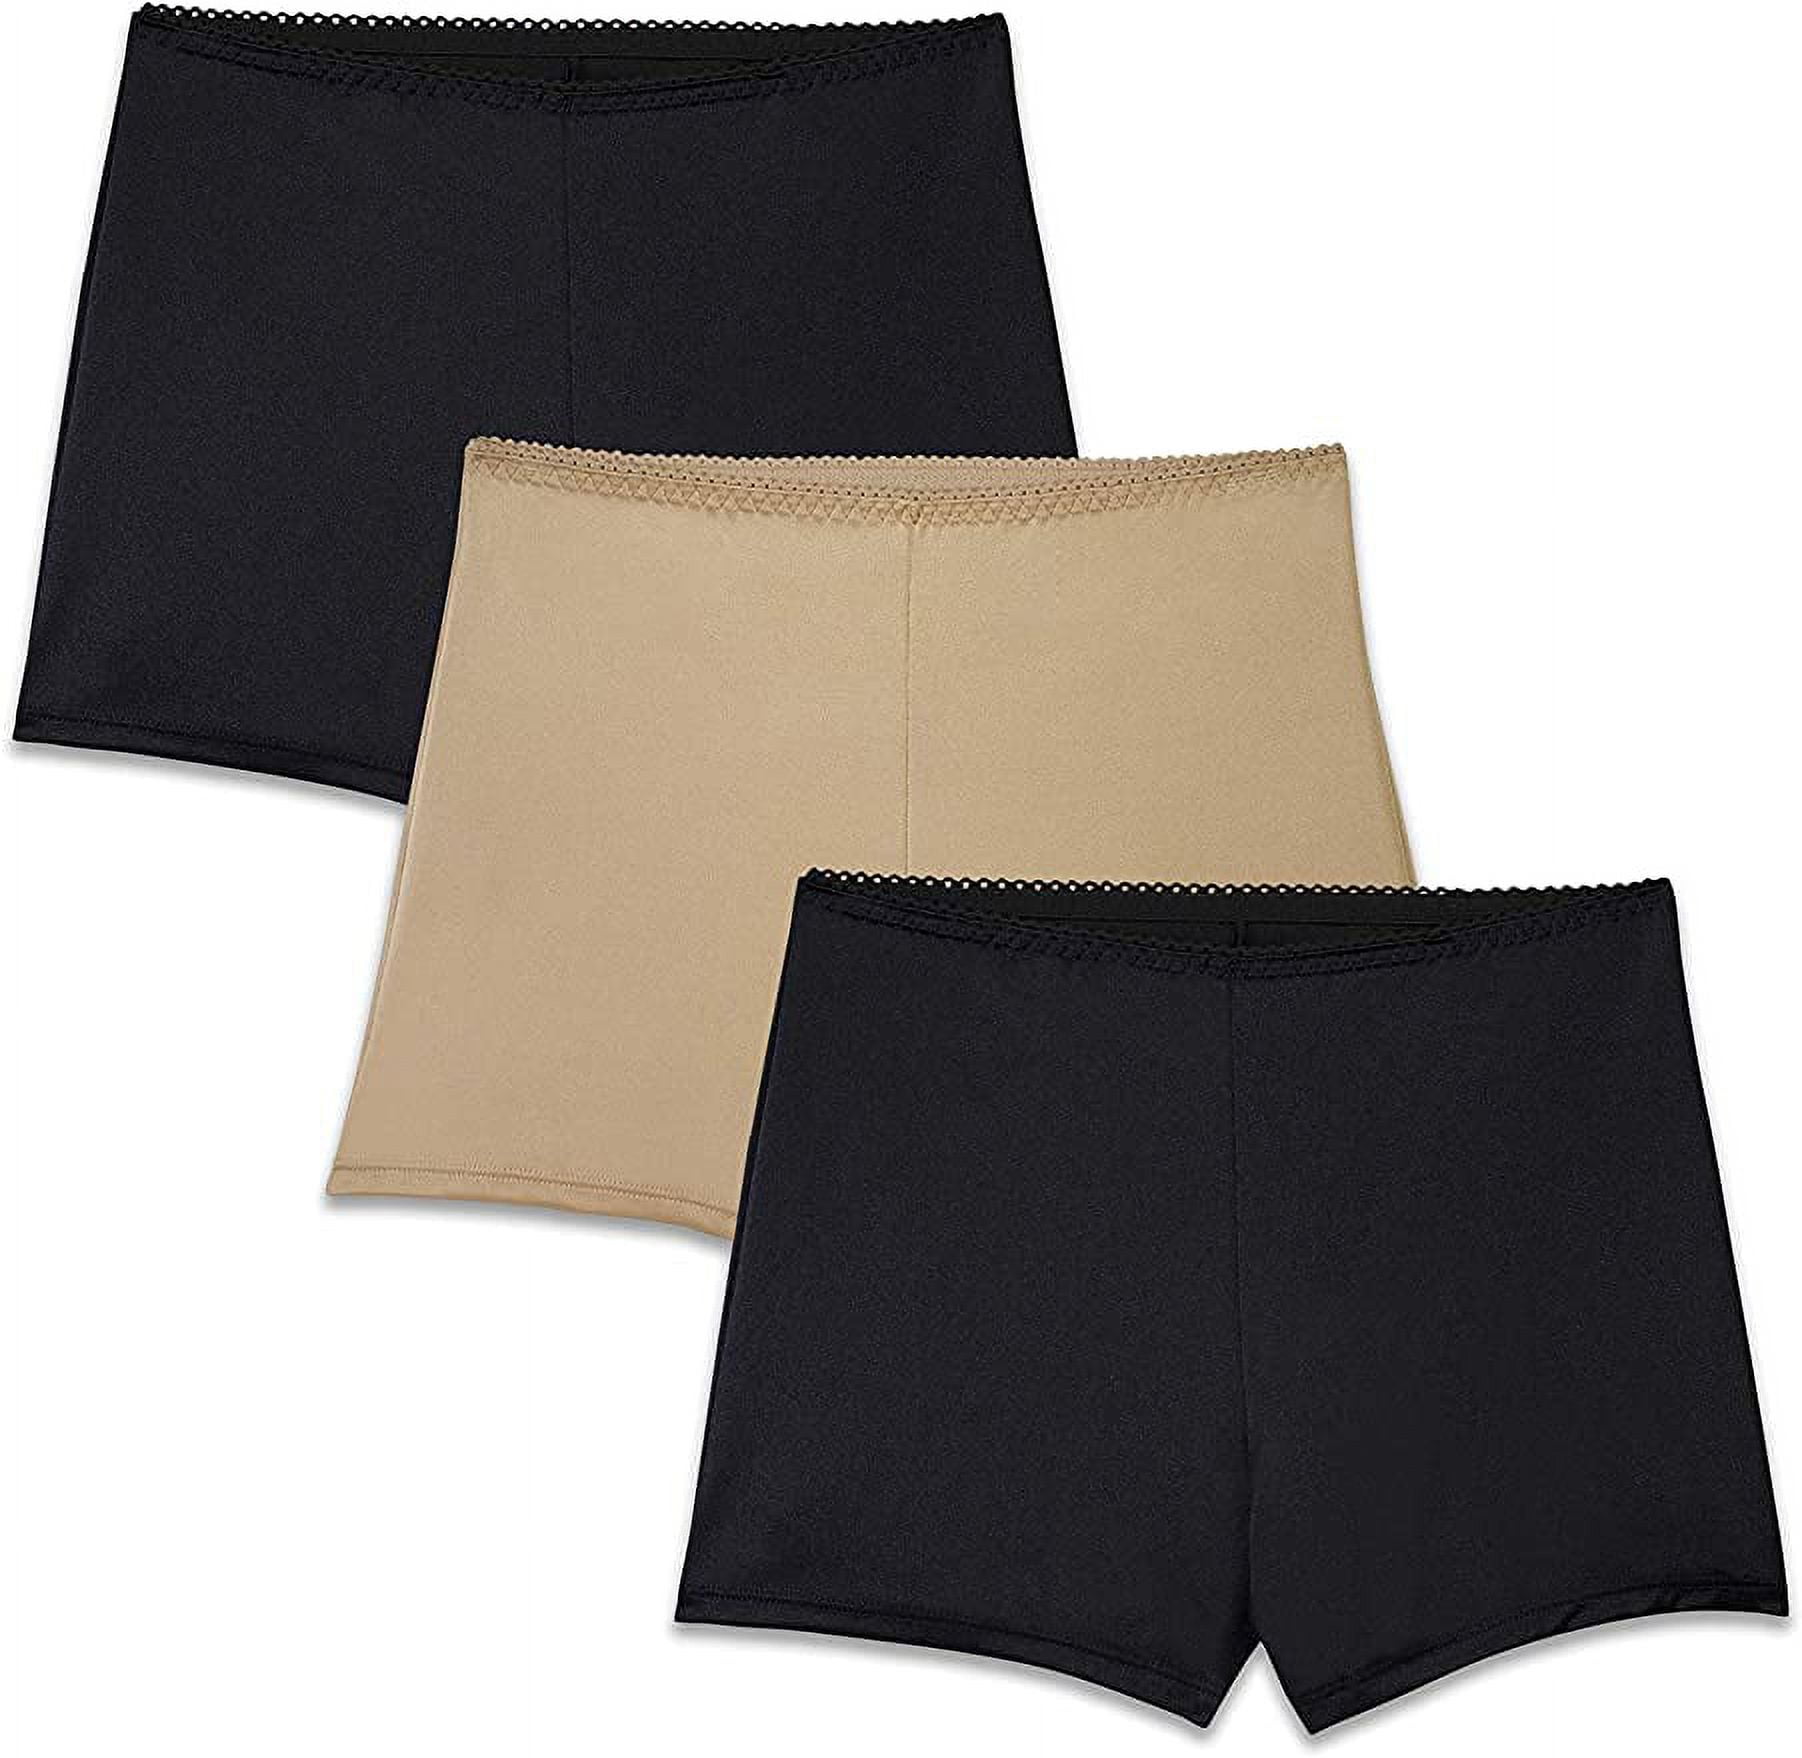 Women's Invisibly Smooth Boy Short Panty, Style 12383 - Walmart.com